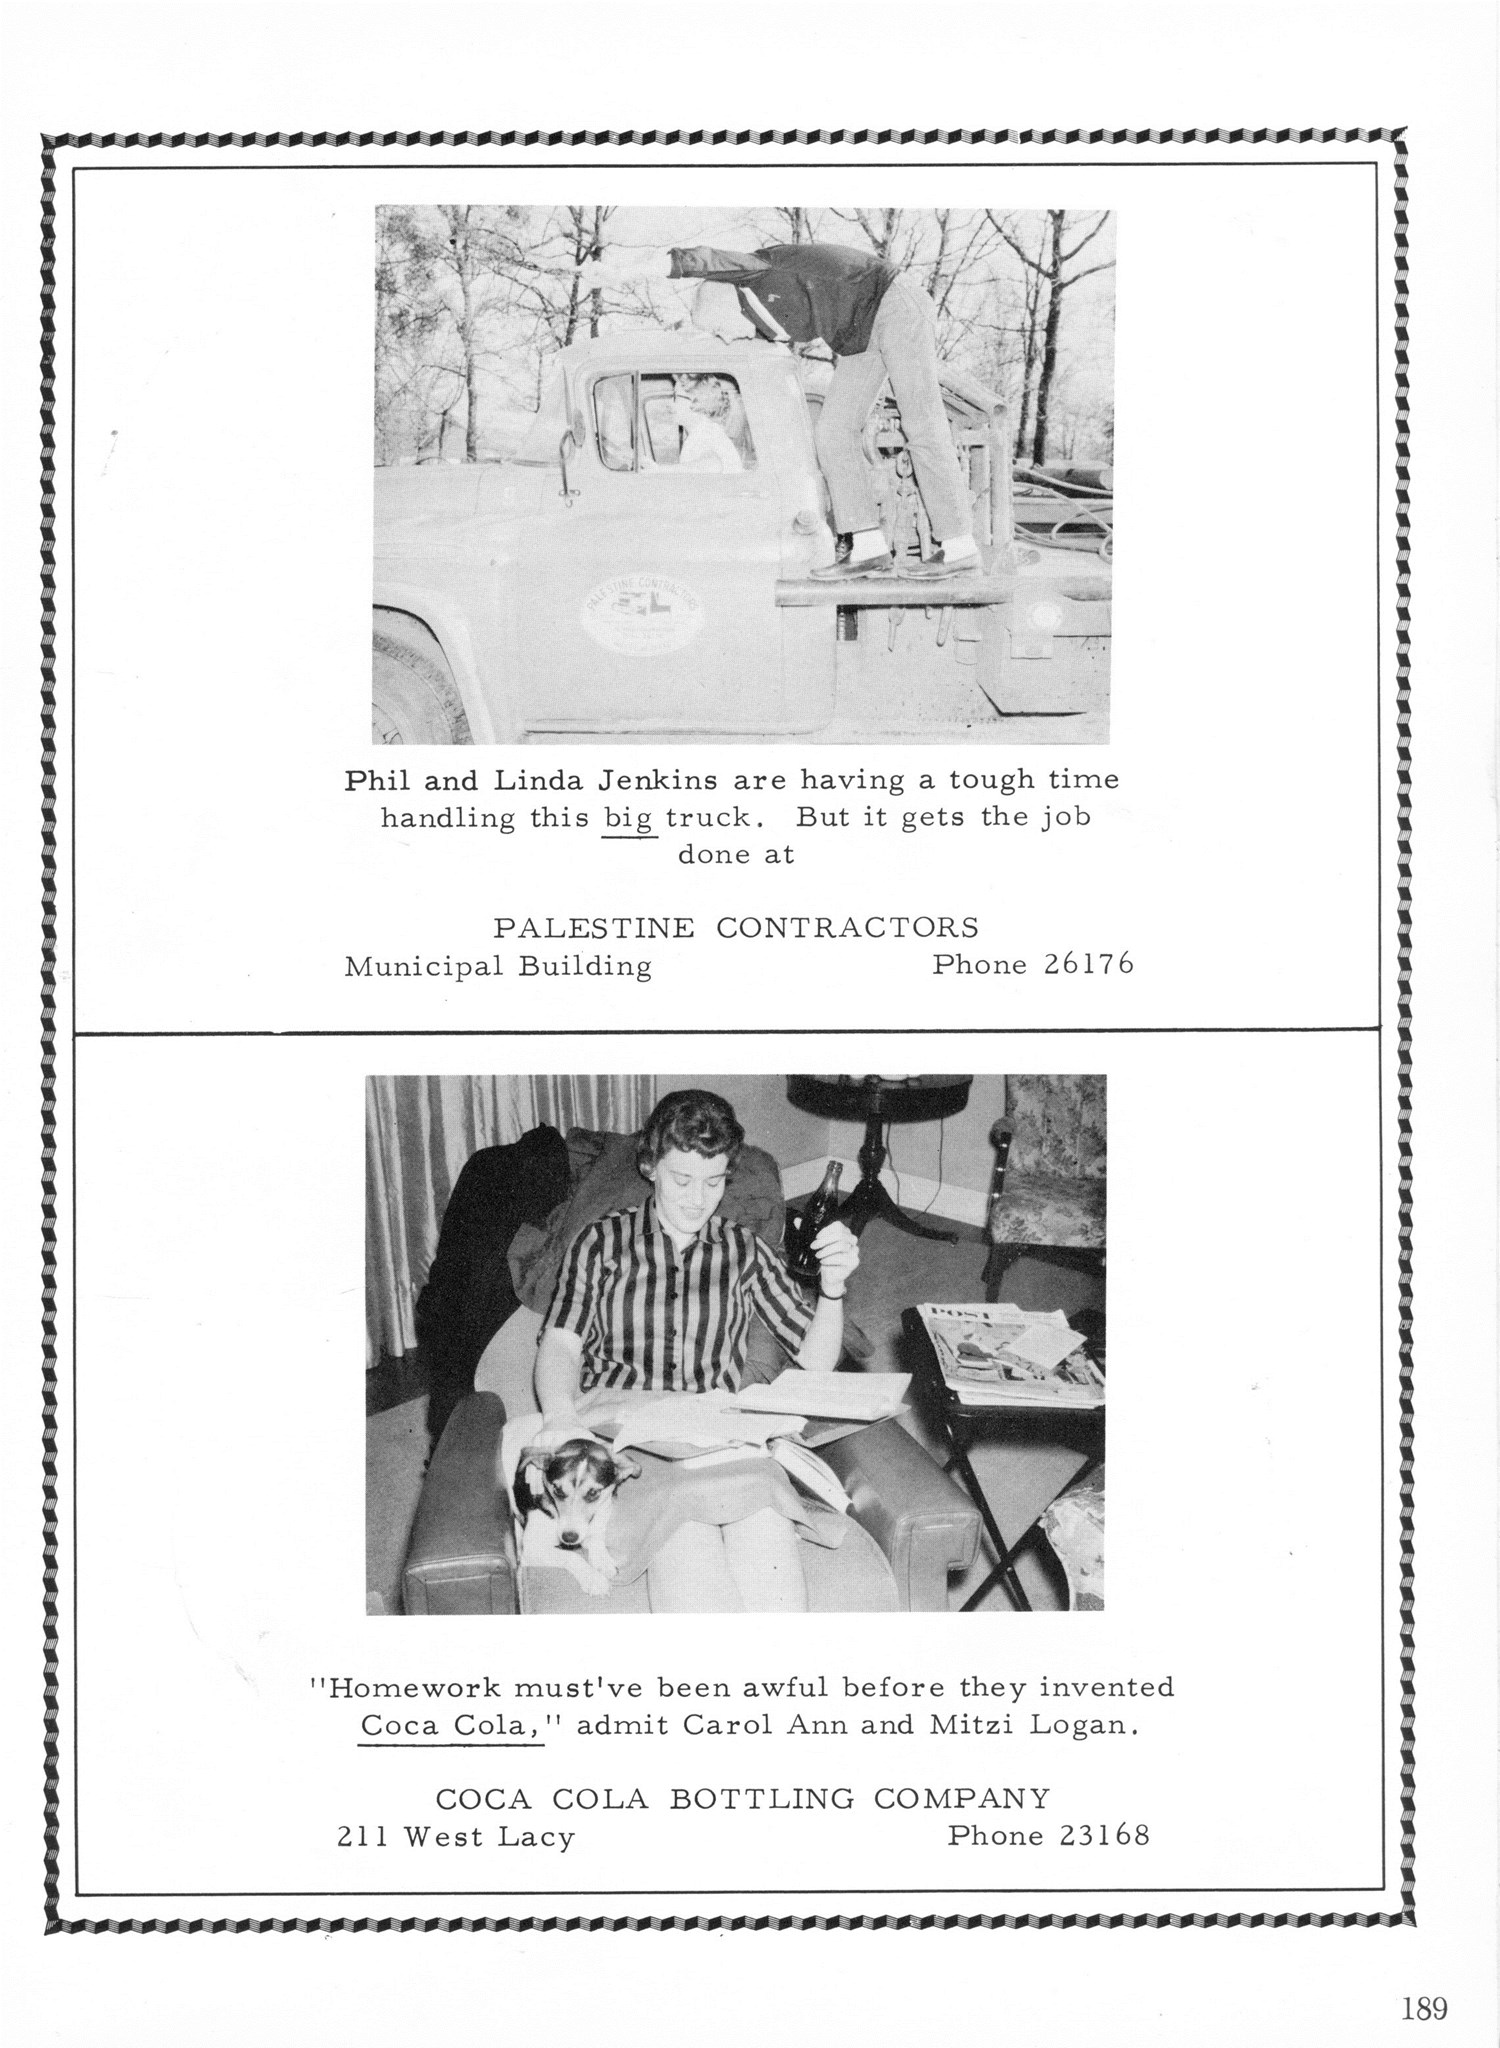 ../../../Images/Large/1959/Arclight-1959-pg0189.jpg